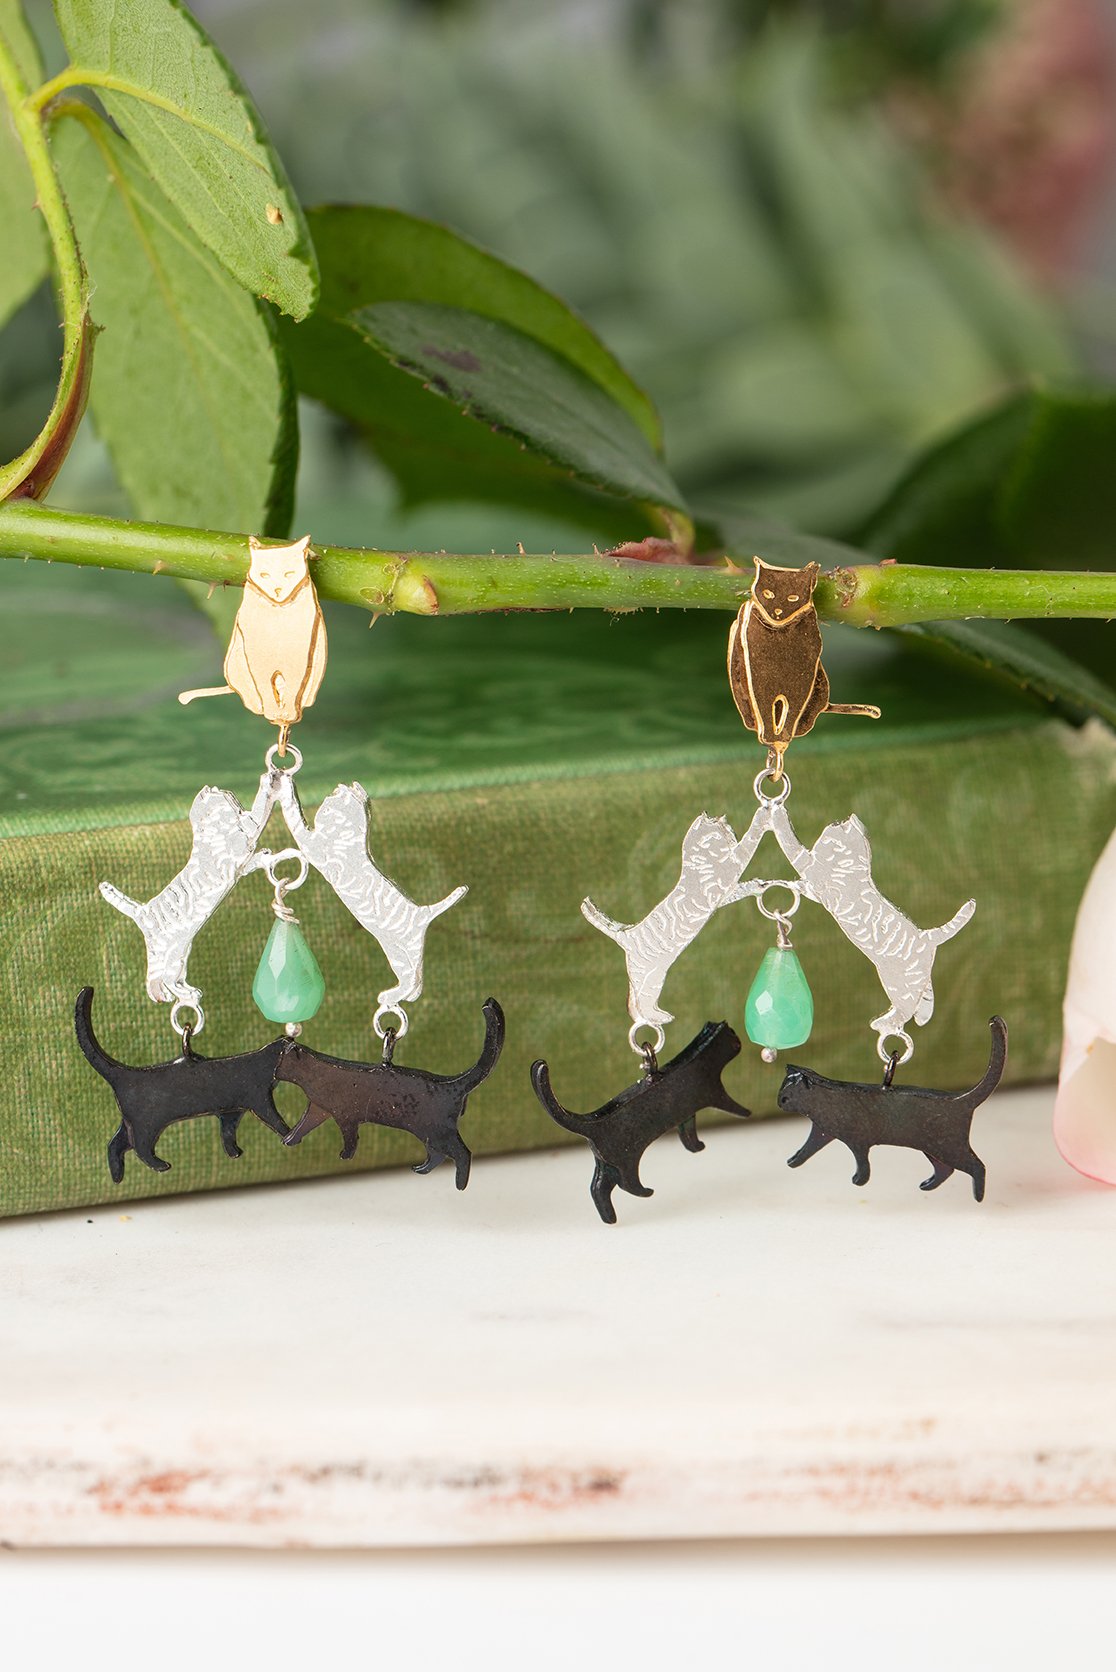 Silver, black, and gold handmade cat earrings